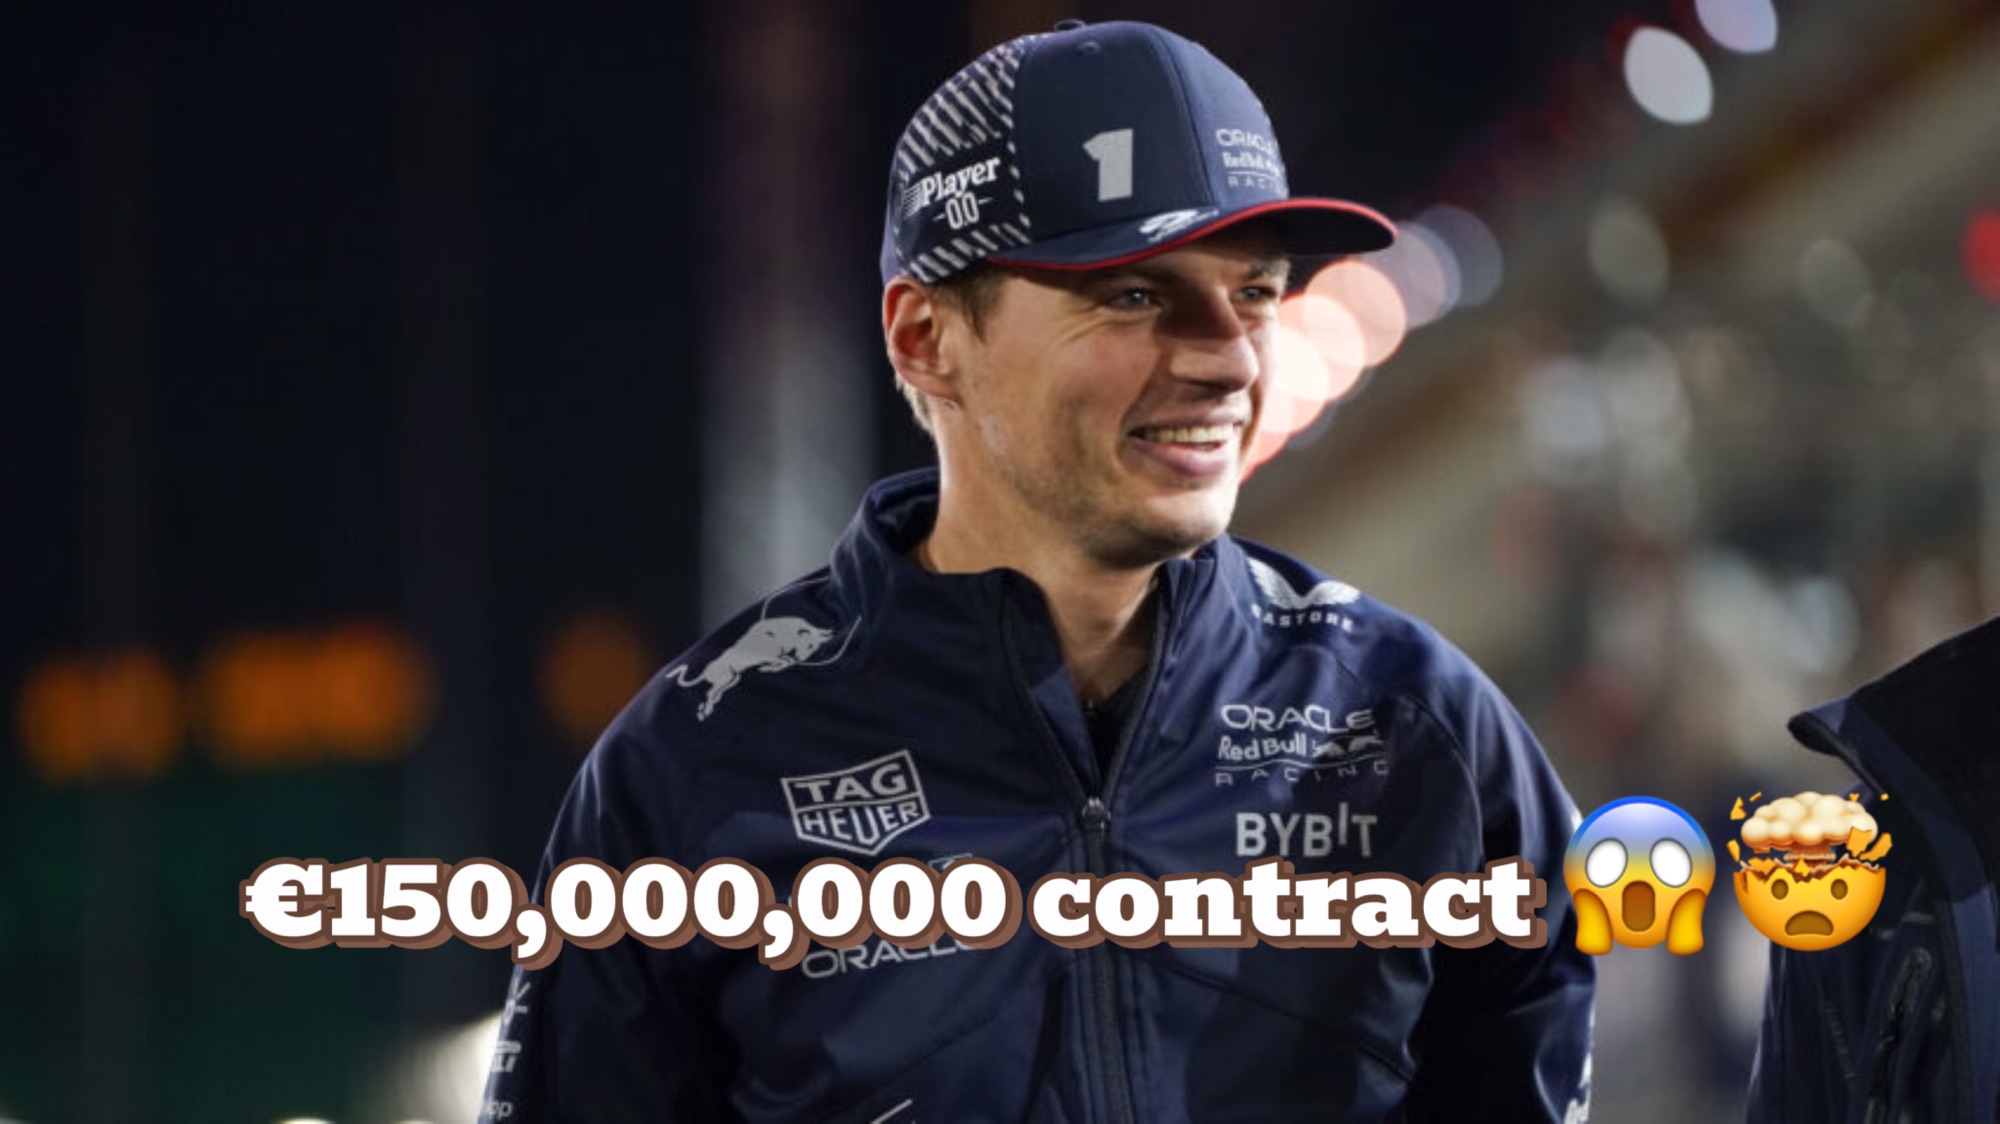 BREAKING: Max Verstappen and Mercedes to discuss a €150,000,000 contract